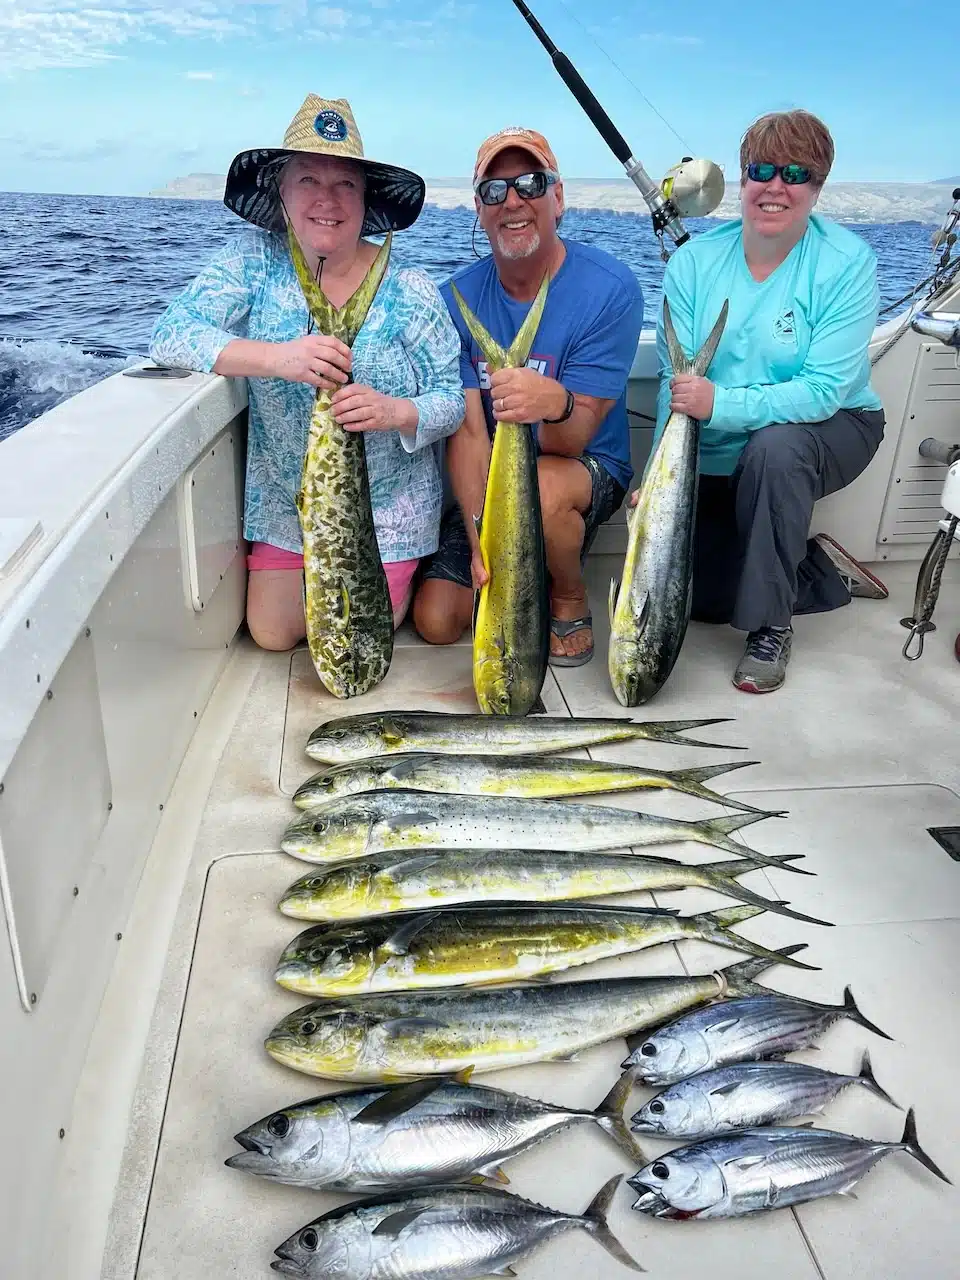 Share Fishing Charter is a Boat Activity located in the city of Lahaina on Maui, Hawaii